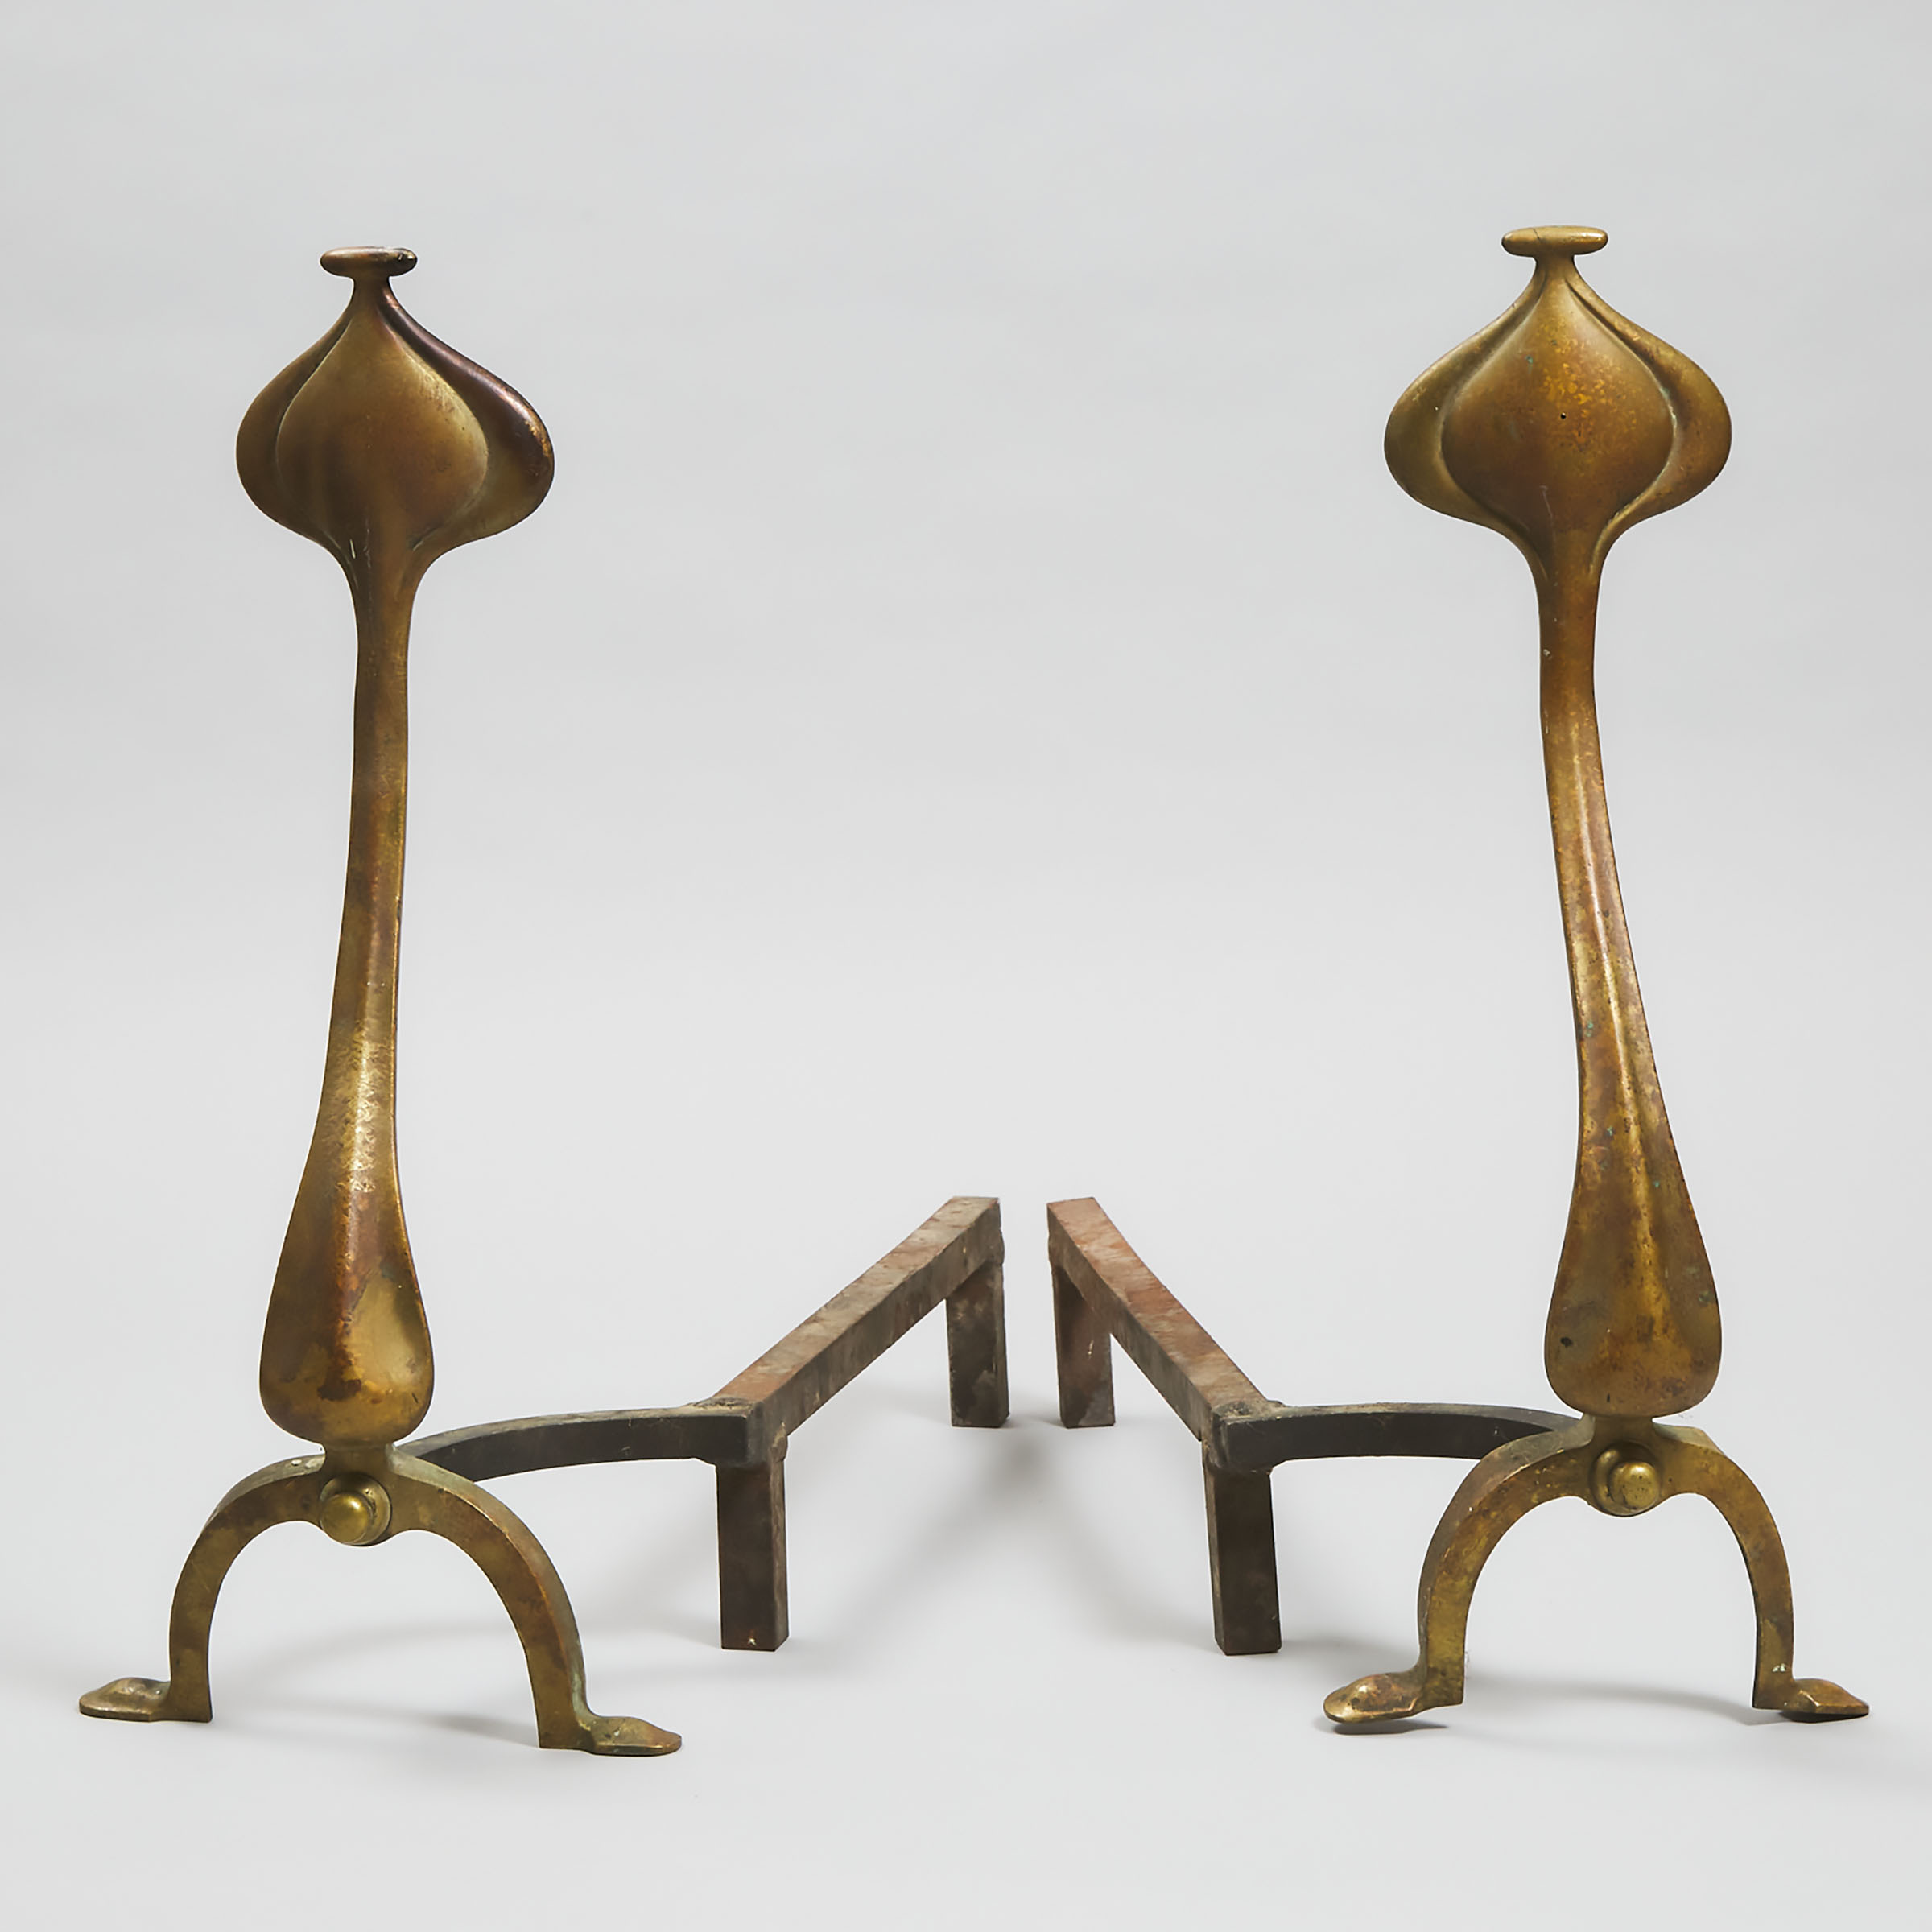 Pair of French Art Nouveau Brass Andirons, late 19th century